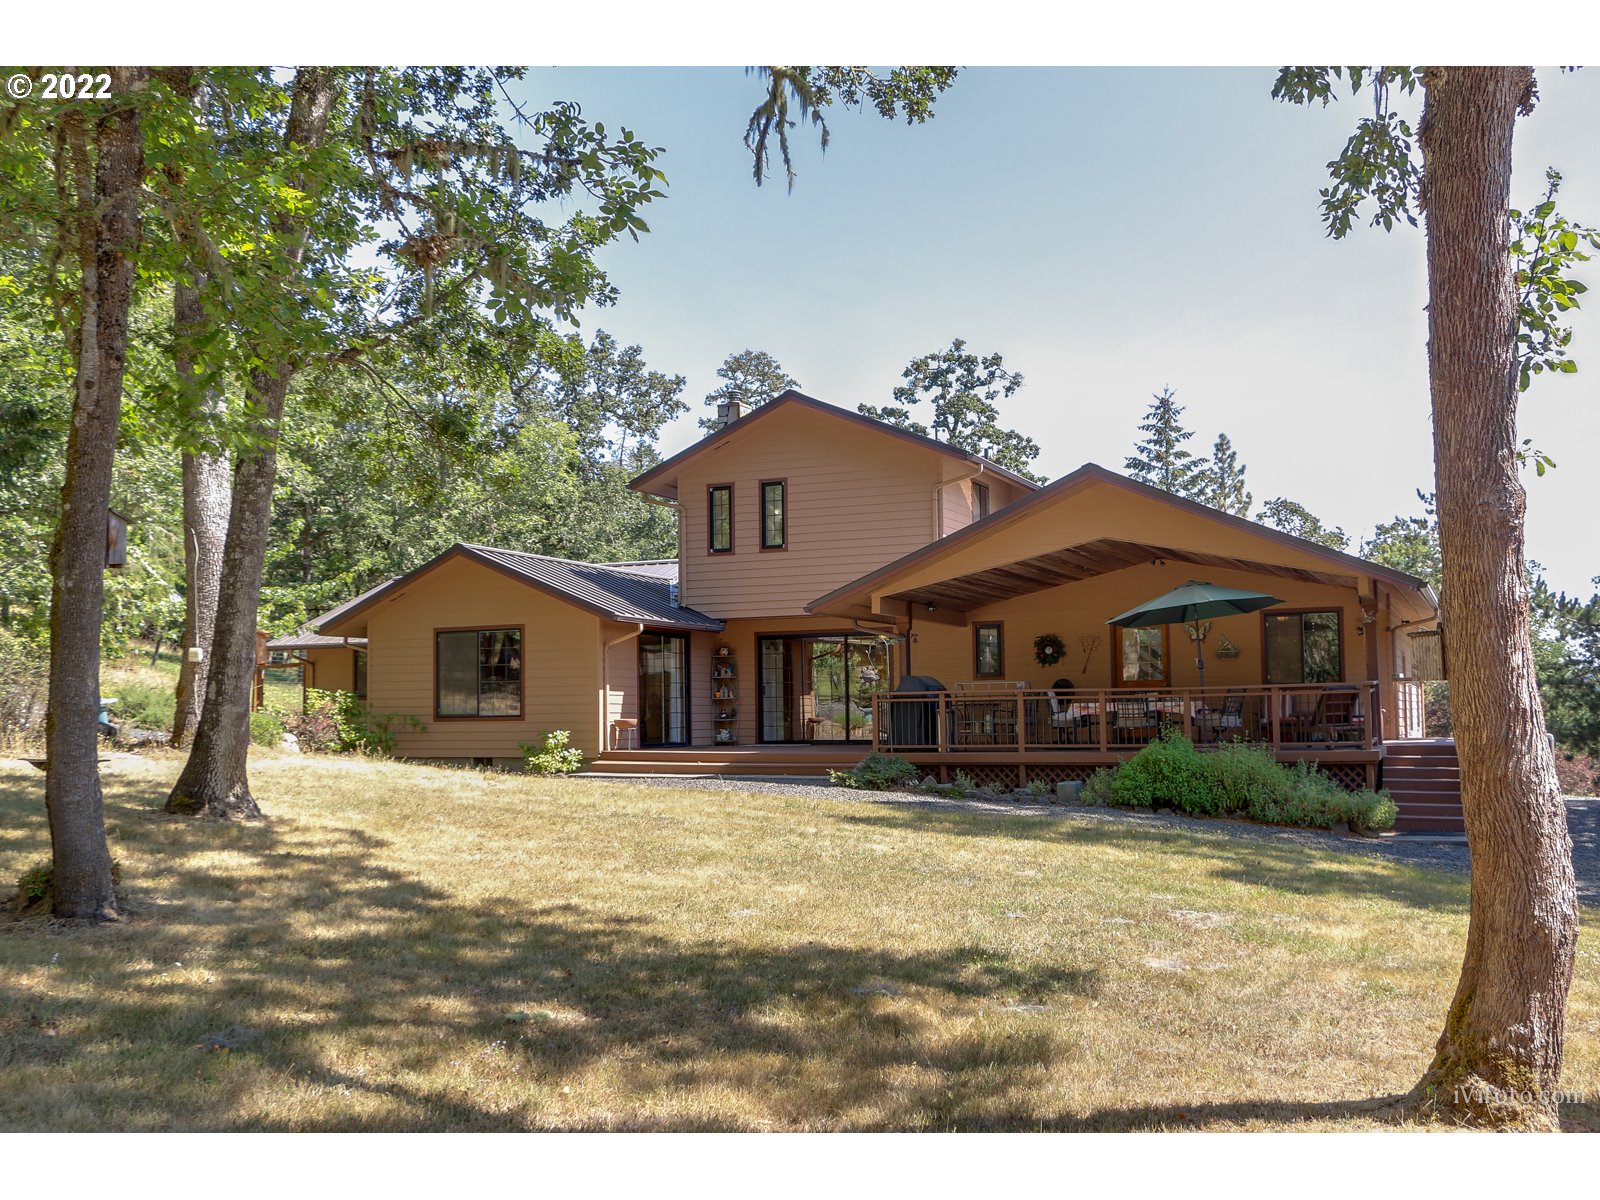 Move-in ready home on 2+ acres in SE Eugene! Enjoy views of your own land, fenced garden spaces, & mountains in the distance. Property features a circle driveway, a large 48 by 27 ft shop that could accommodate a Class A RV, two 1500 gallon well water cisterns, & a large, private covered deck. The home boasts a certified wood stove, two living rooms, a spacious kitchen w/ an eating bar, two car garage, an office & craft room plus 3 bedrooms. Don't miss the unfinished attic/bonus room! $795,000.